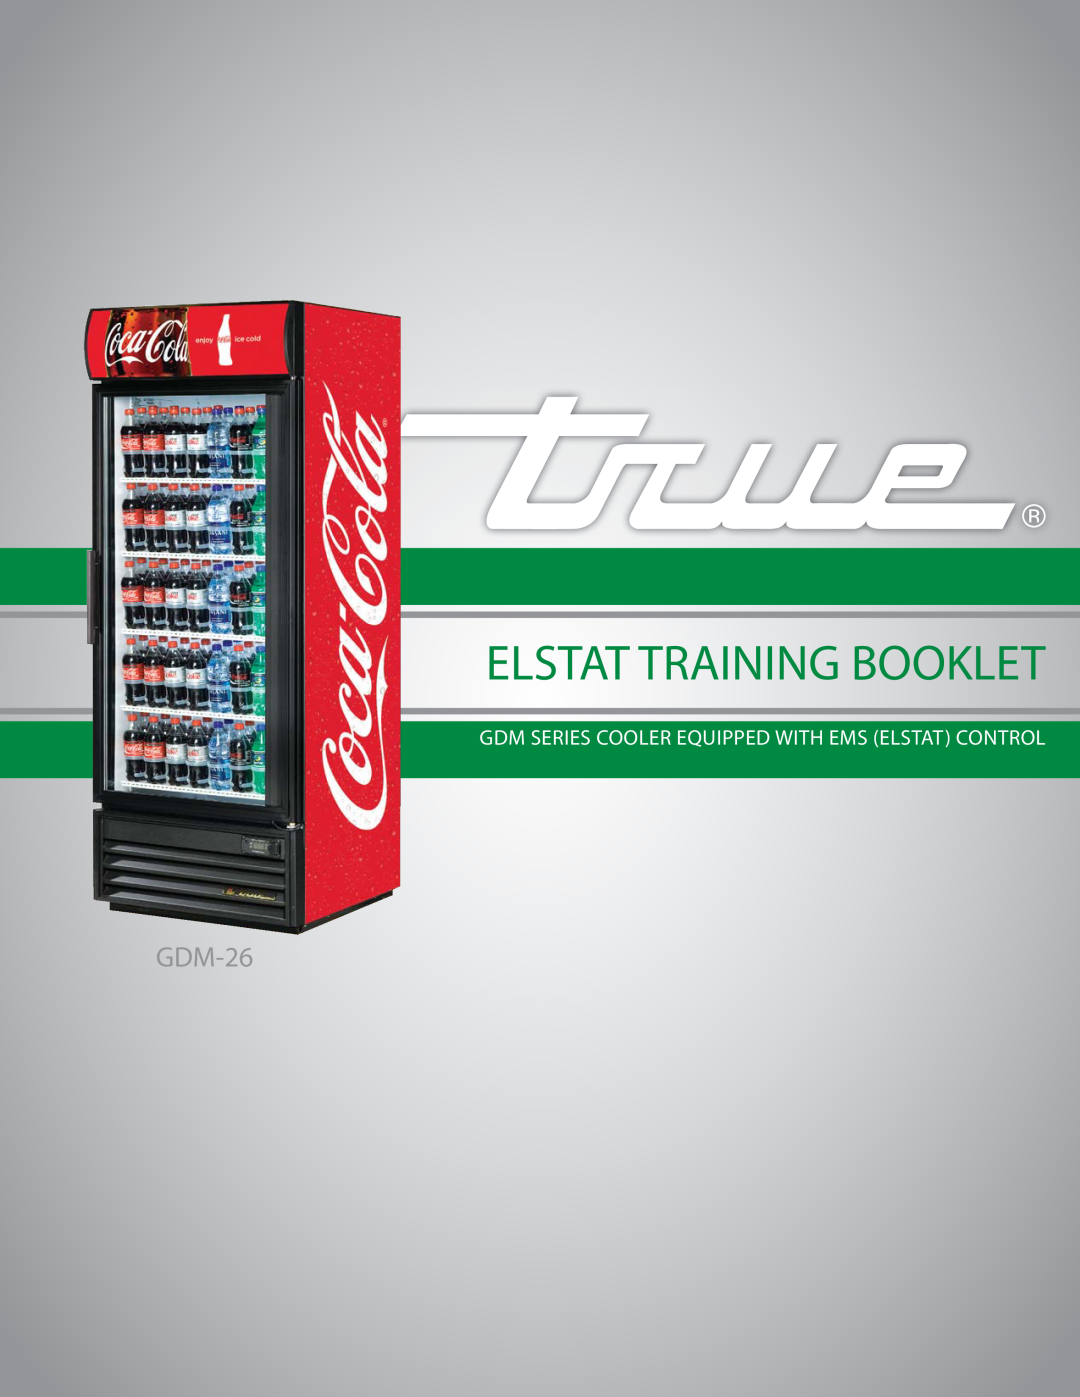 True Manufacturing Company GDM-26 manual Elstat Training Booklet, Gdm Series Cooler Equipped With Ems Elstat Control 